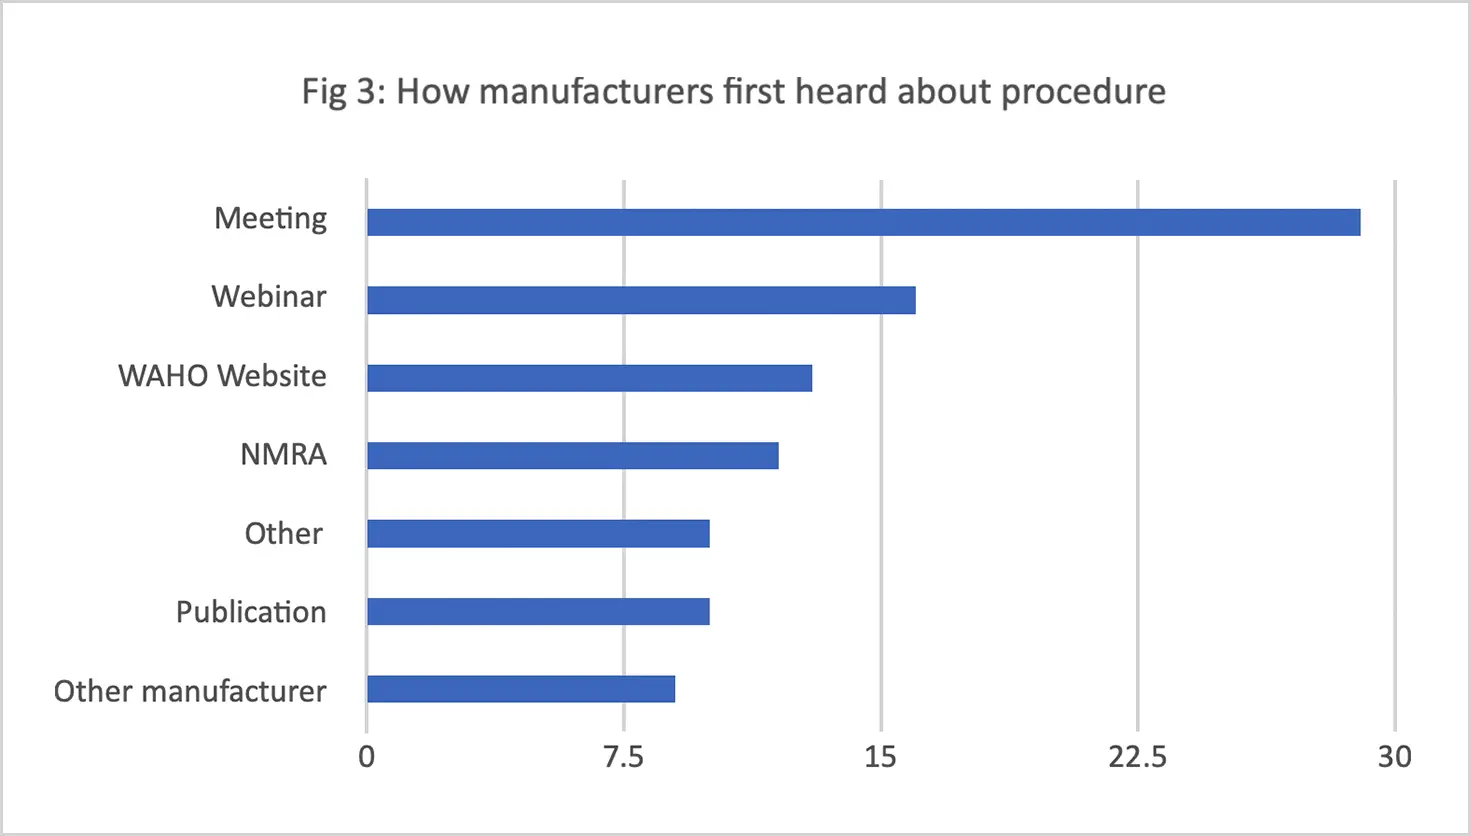 Fig 3: How did the Manufacturers first hear about the procedure?